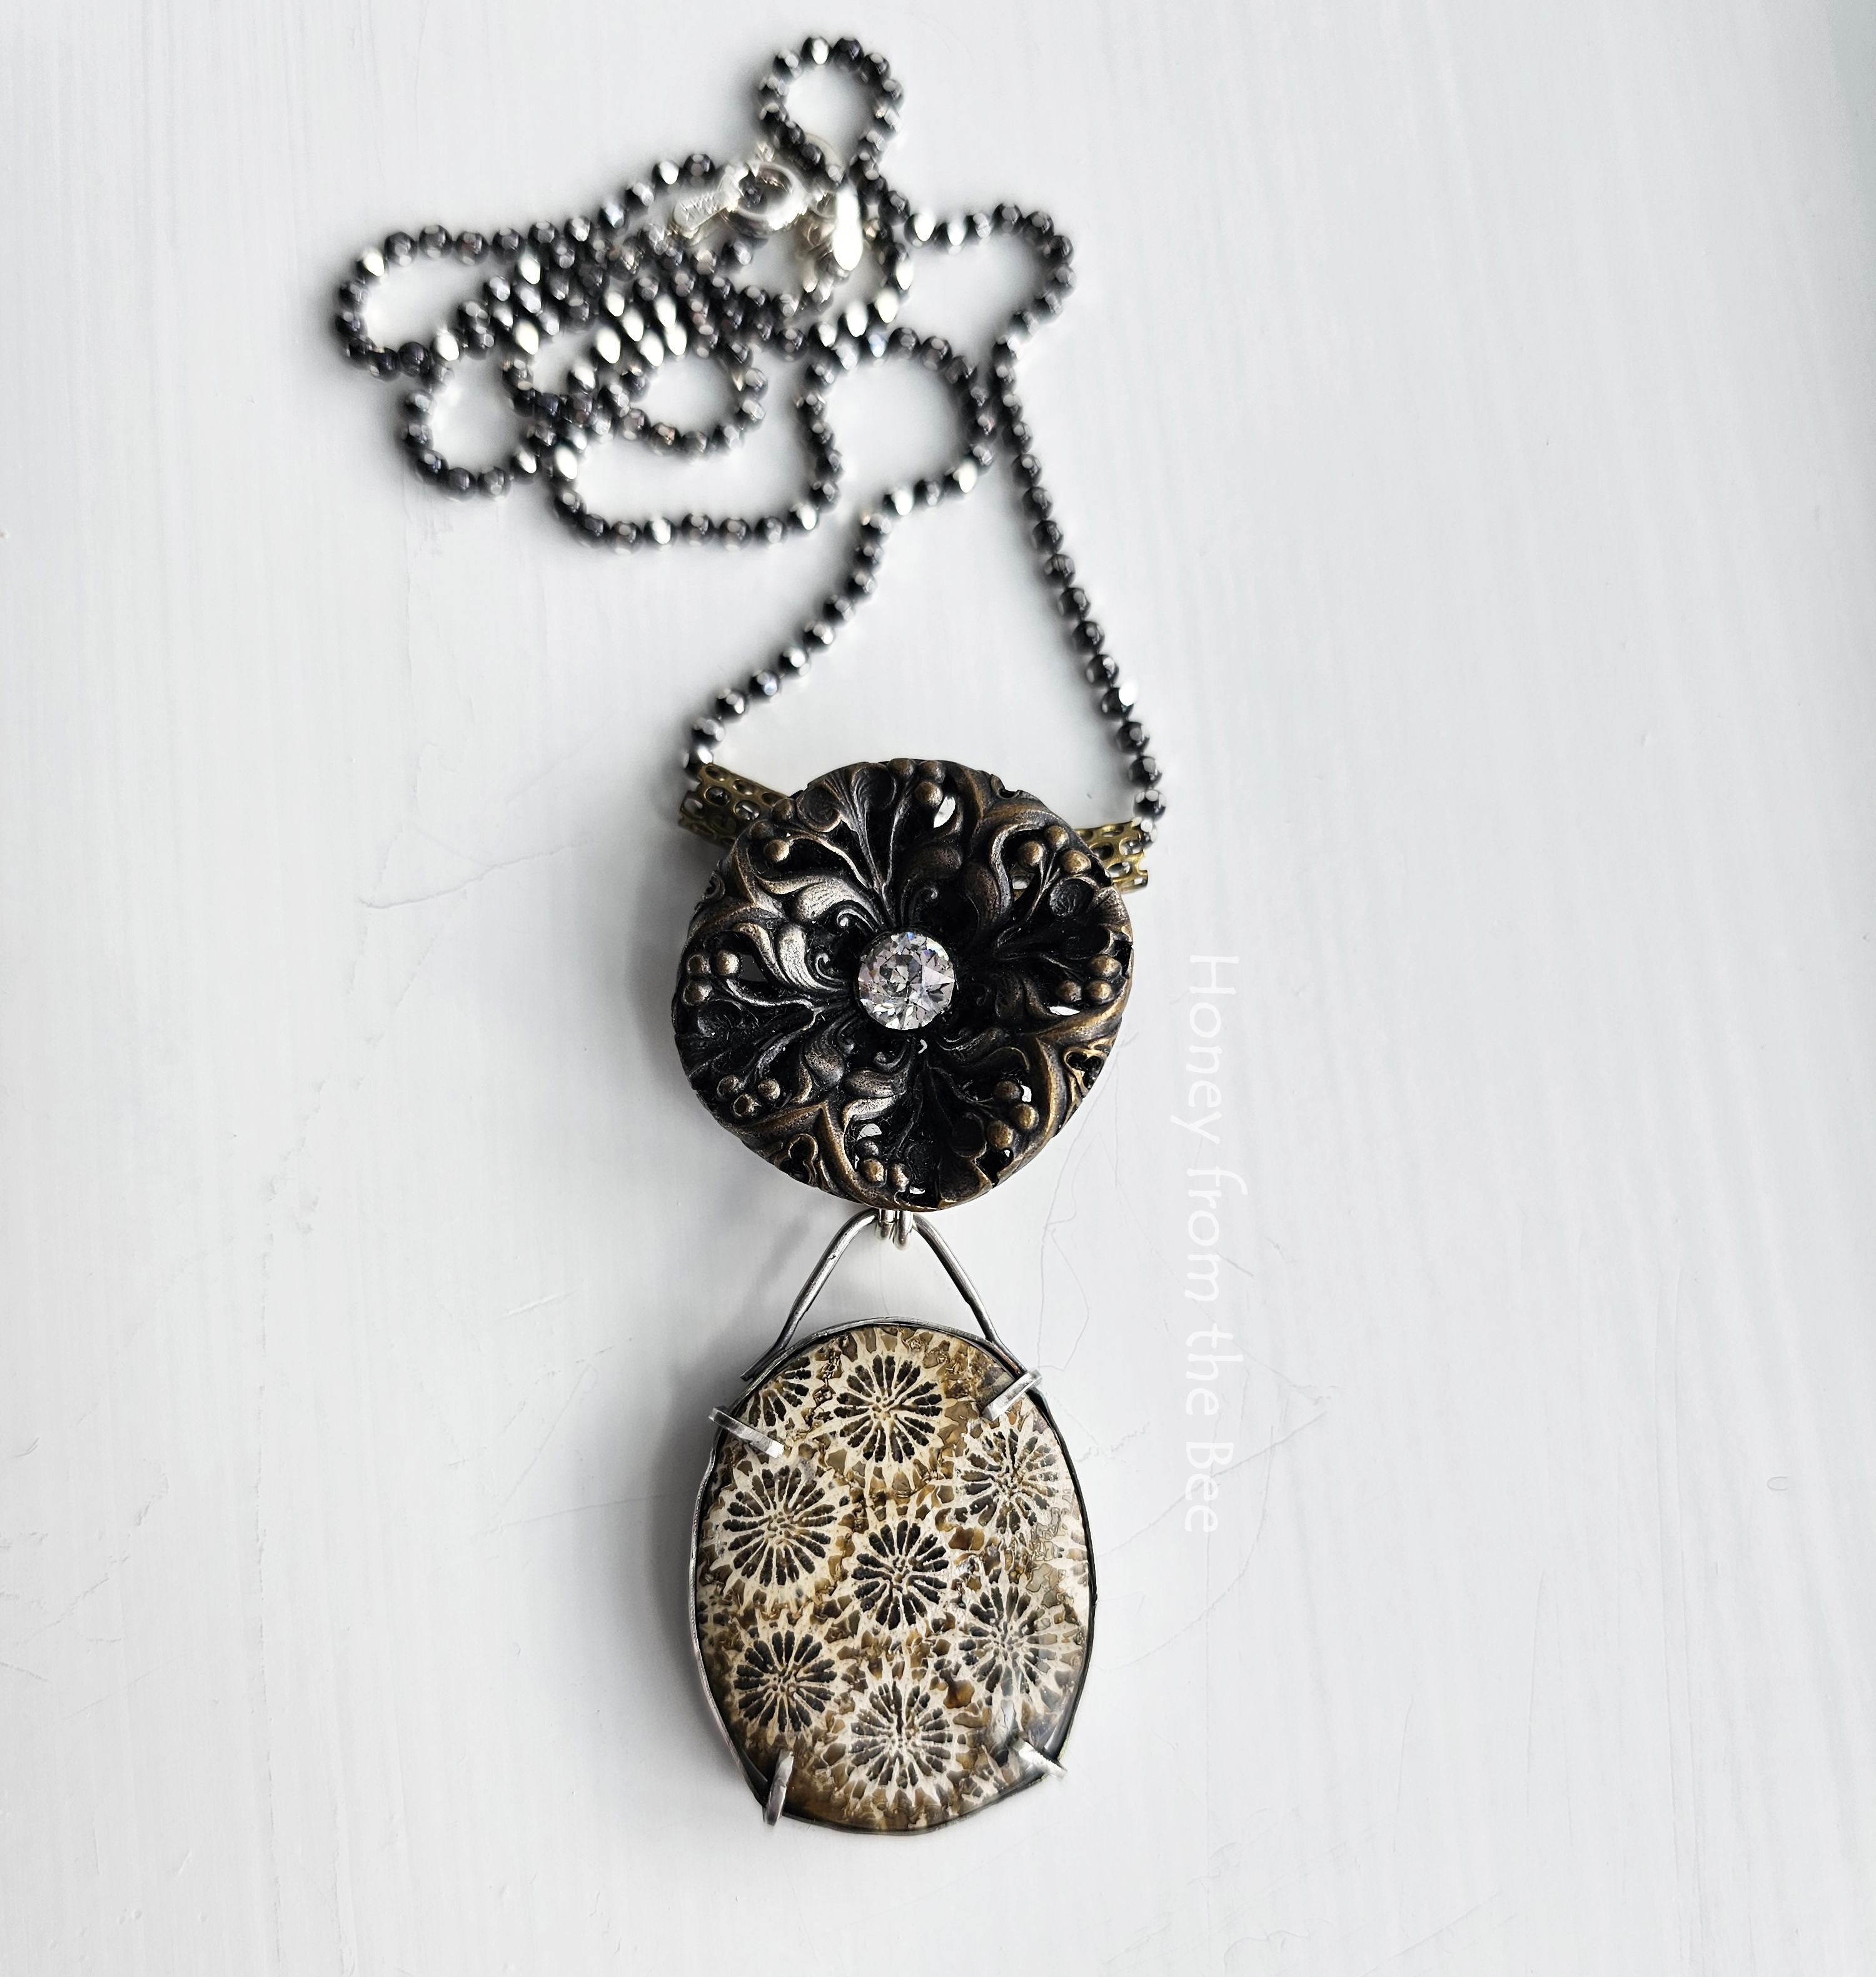 Agatized Fossil Coral pendant in brown and cream